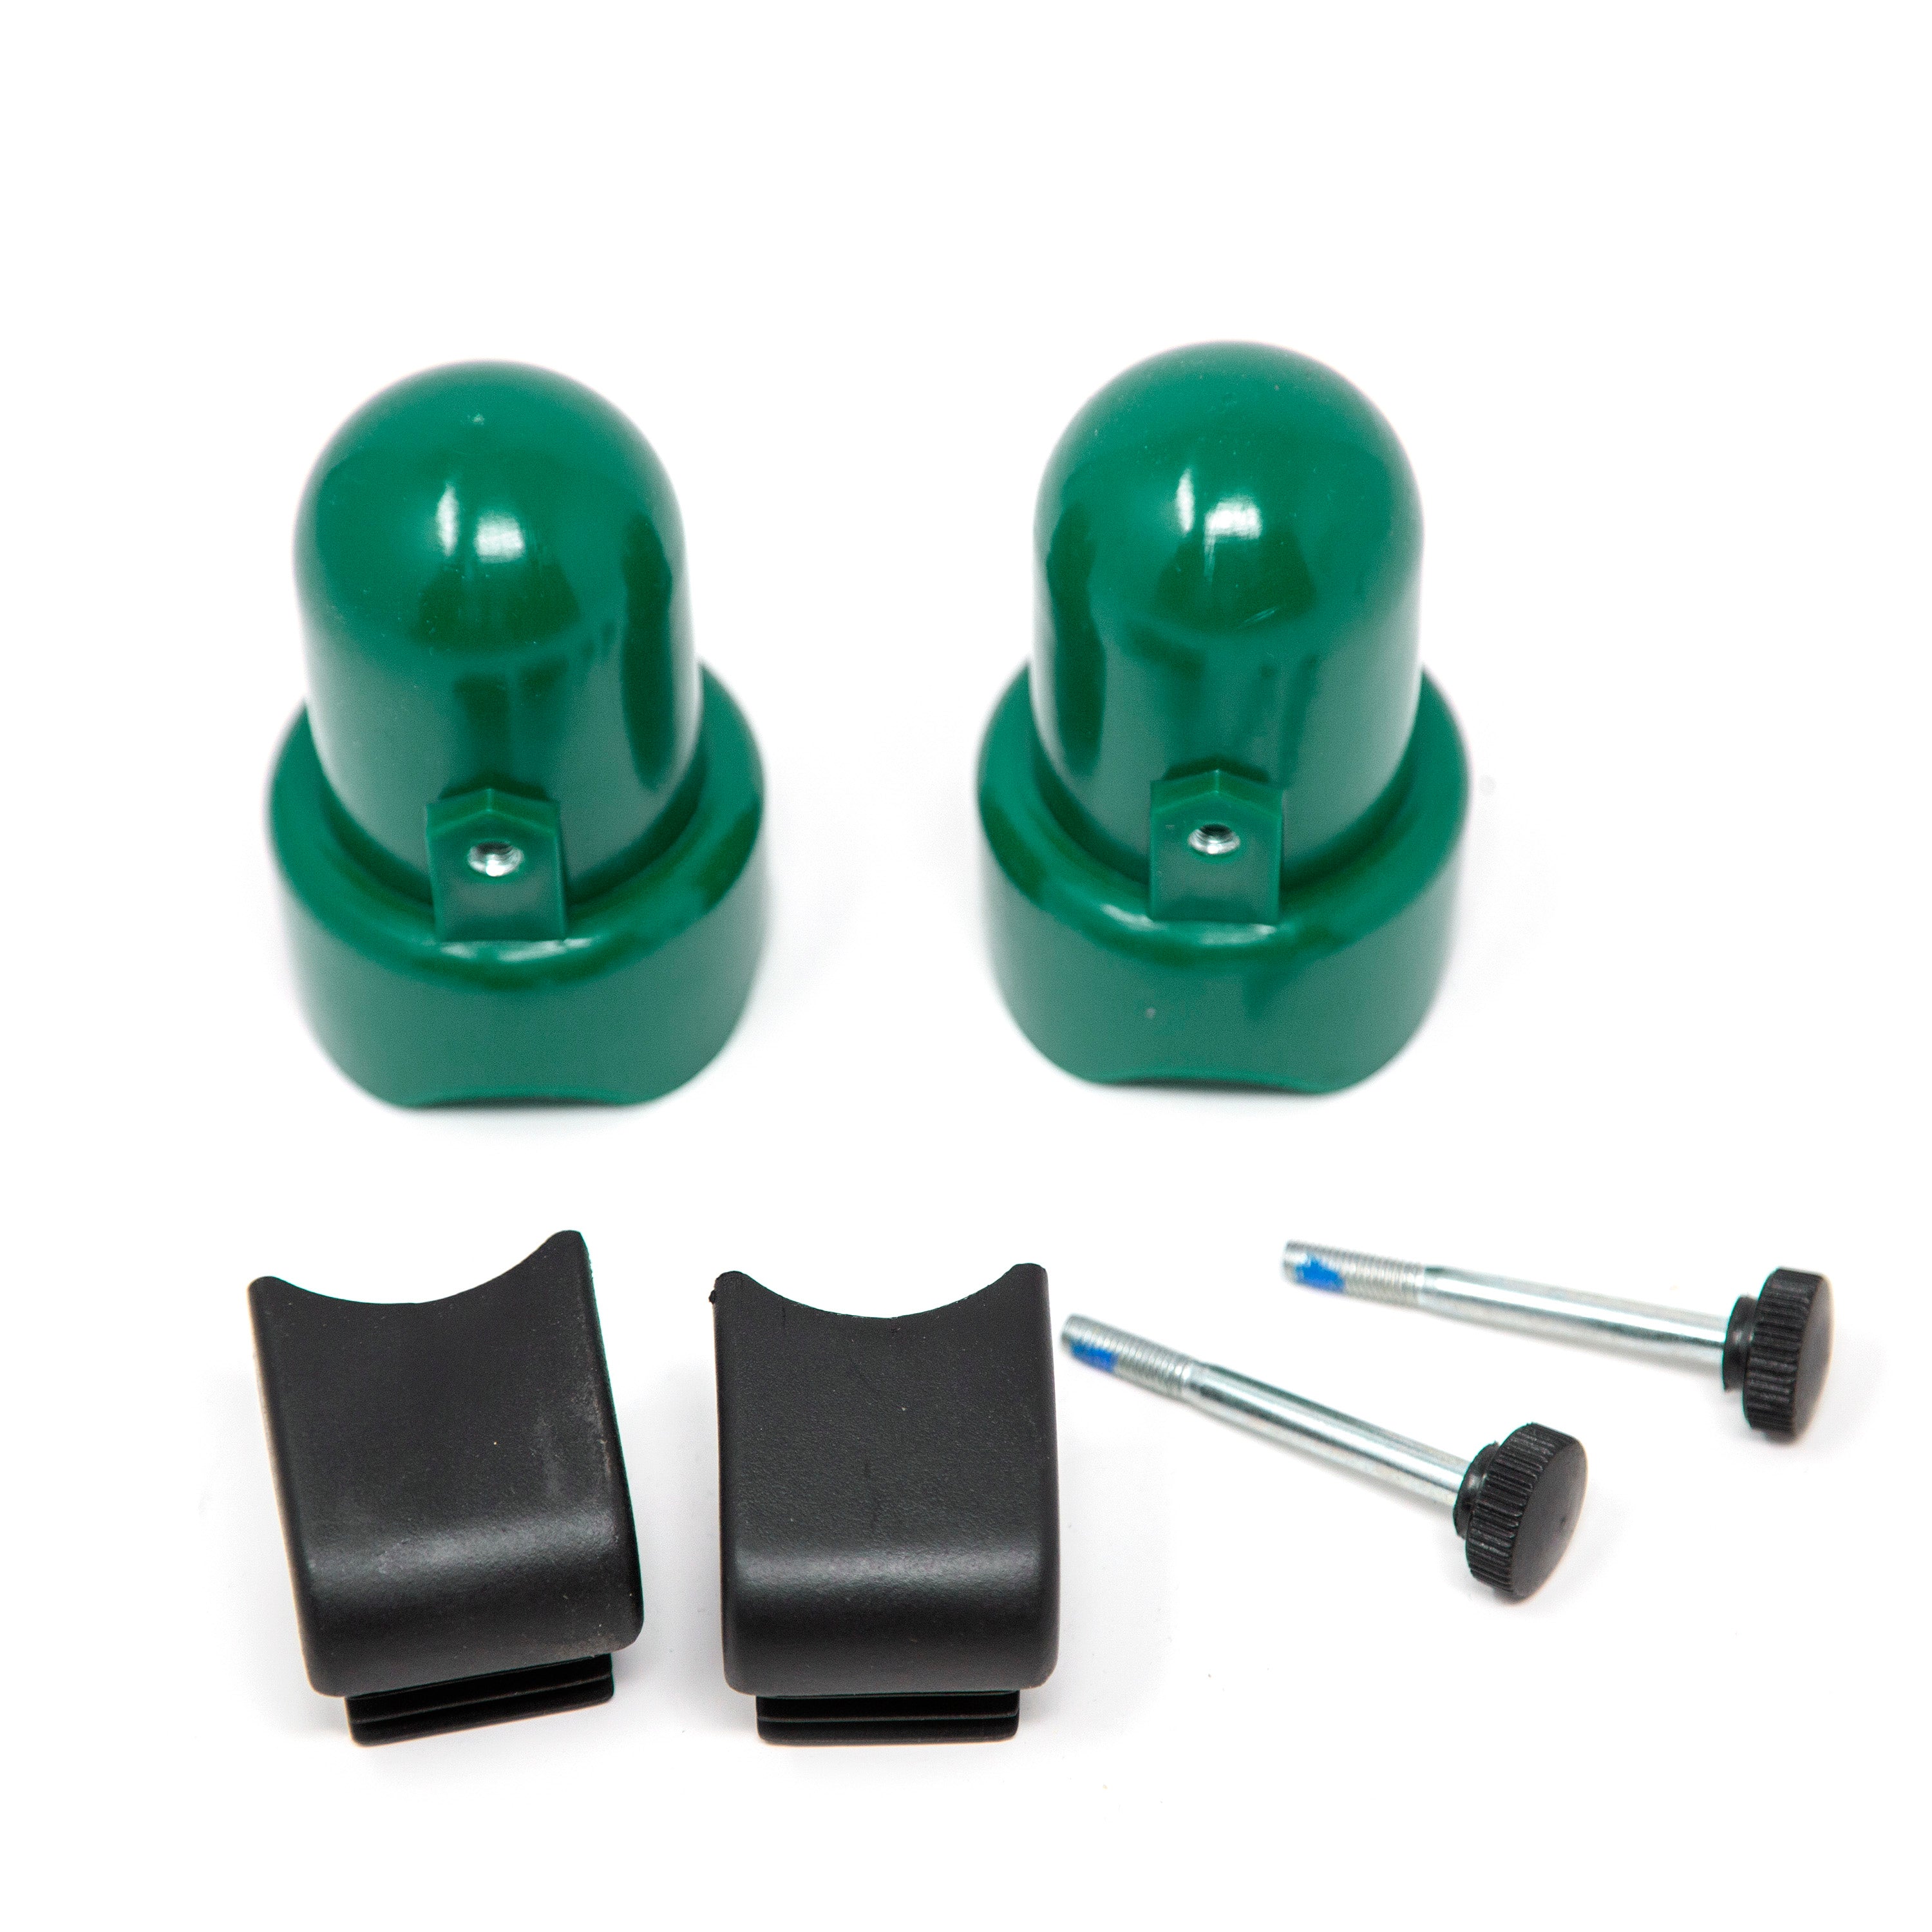 Large Green Pole Cap with Bolts and End Caps (set of 2) 8016, 1016, 8003